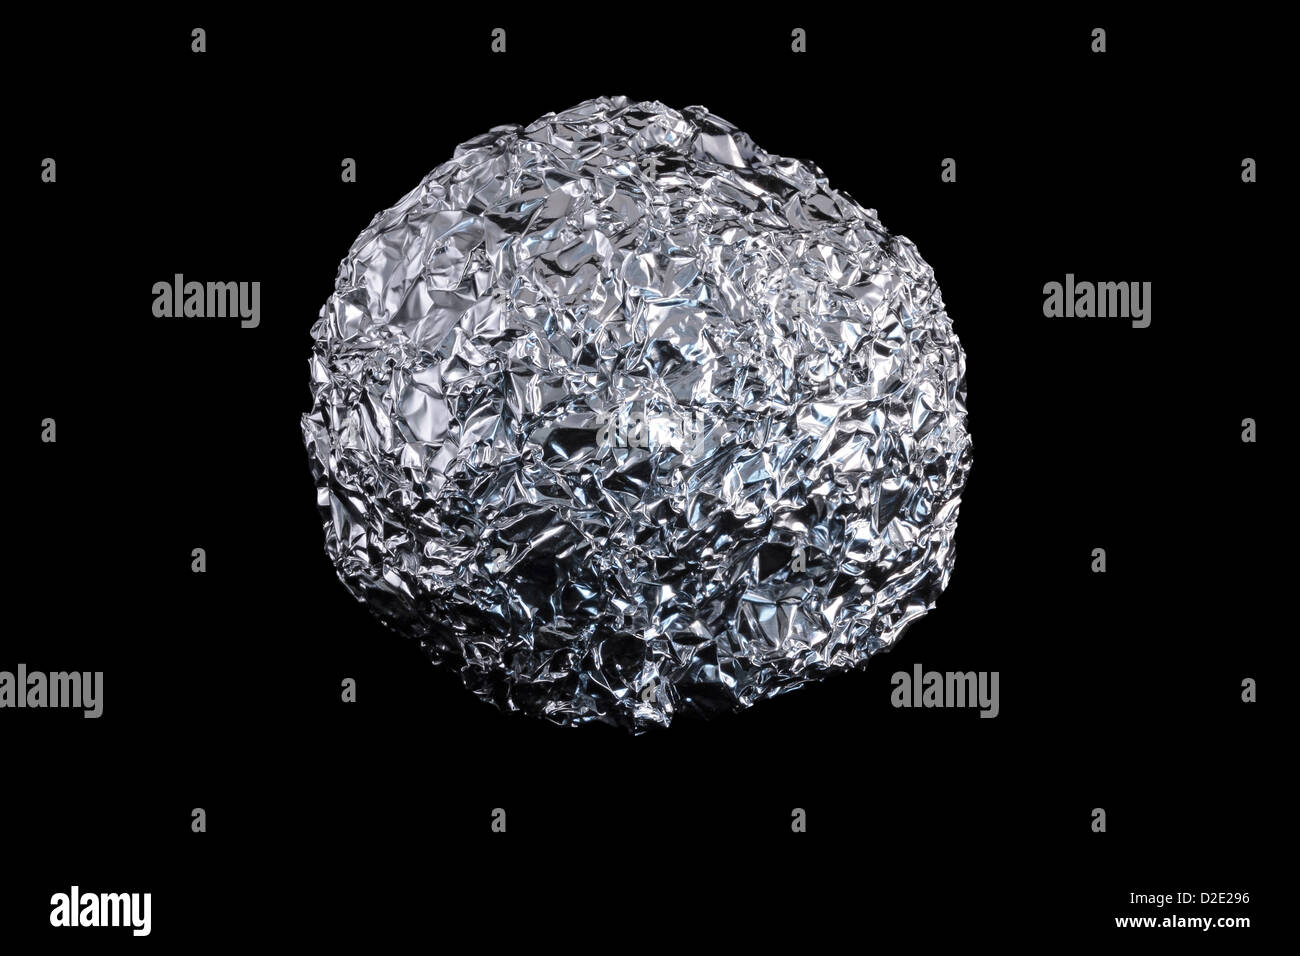 Aluminium Kitchen Foil Screwed Up Into a Ball isolated on black background Stock Photo